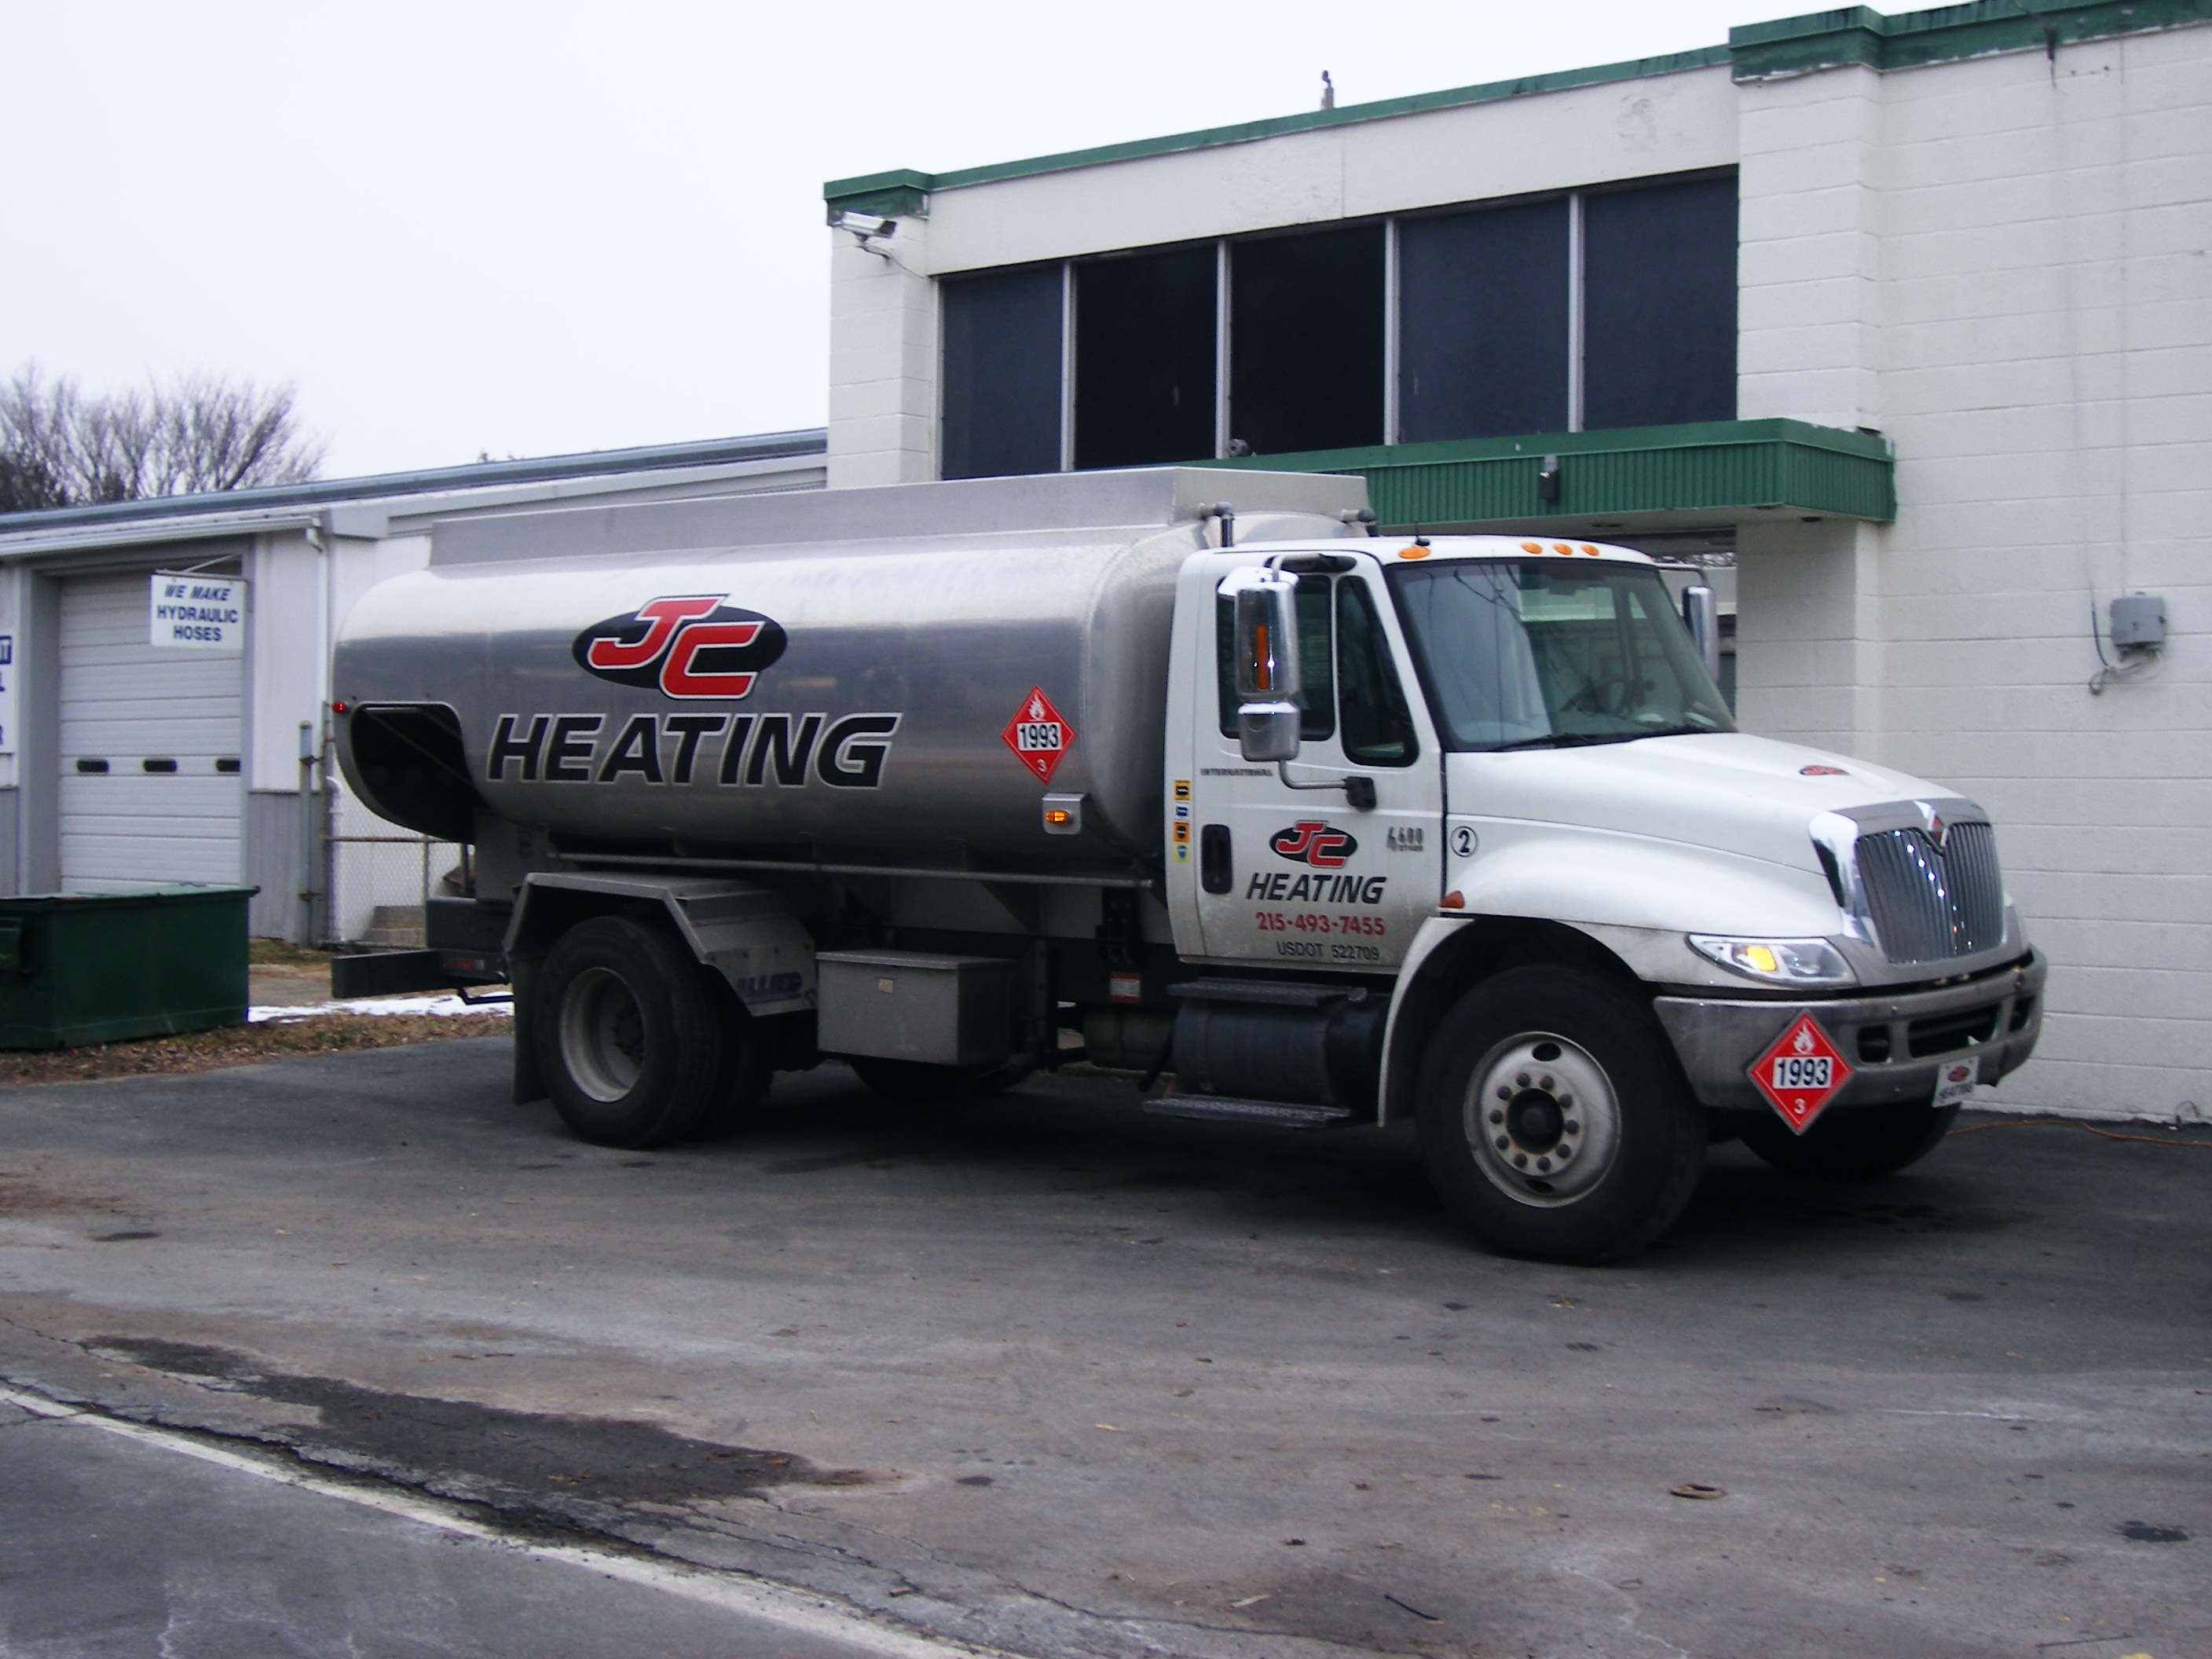 JC Heating sells quality fuel oil at discount prices